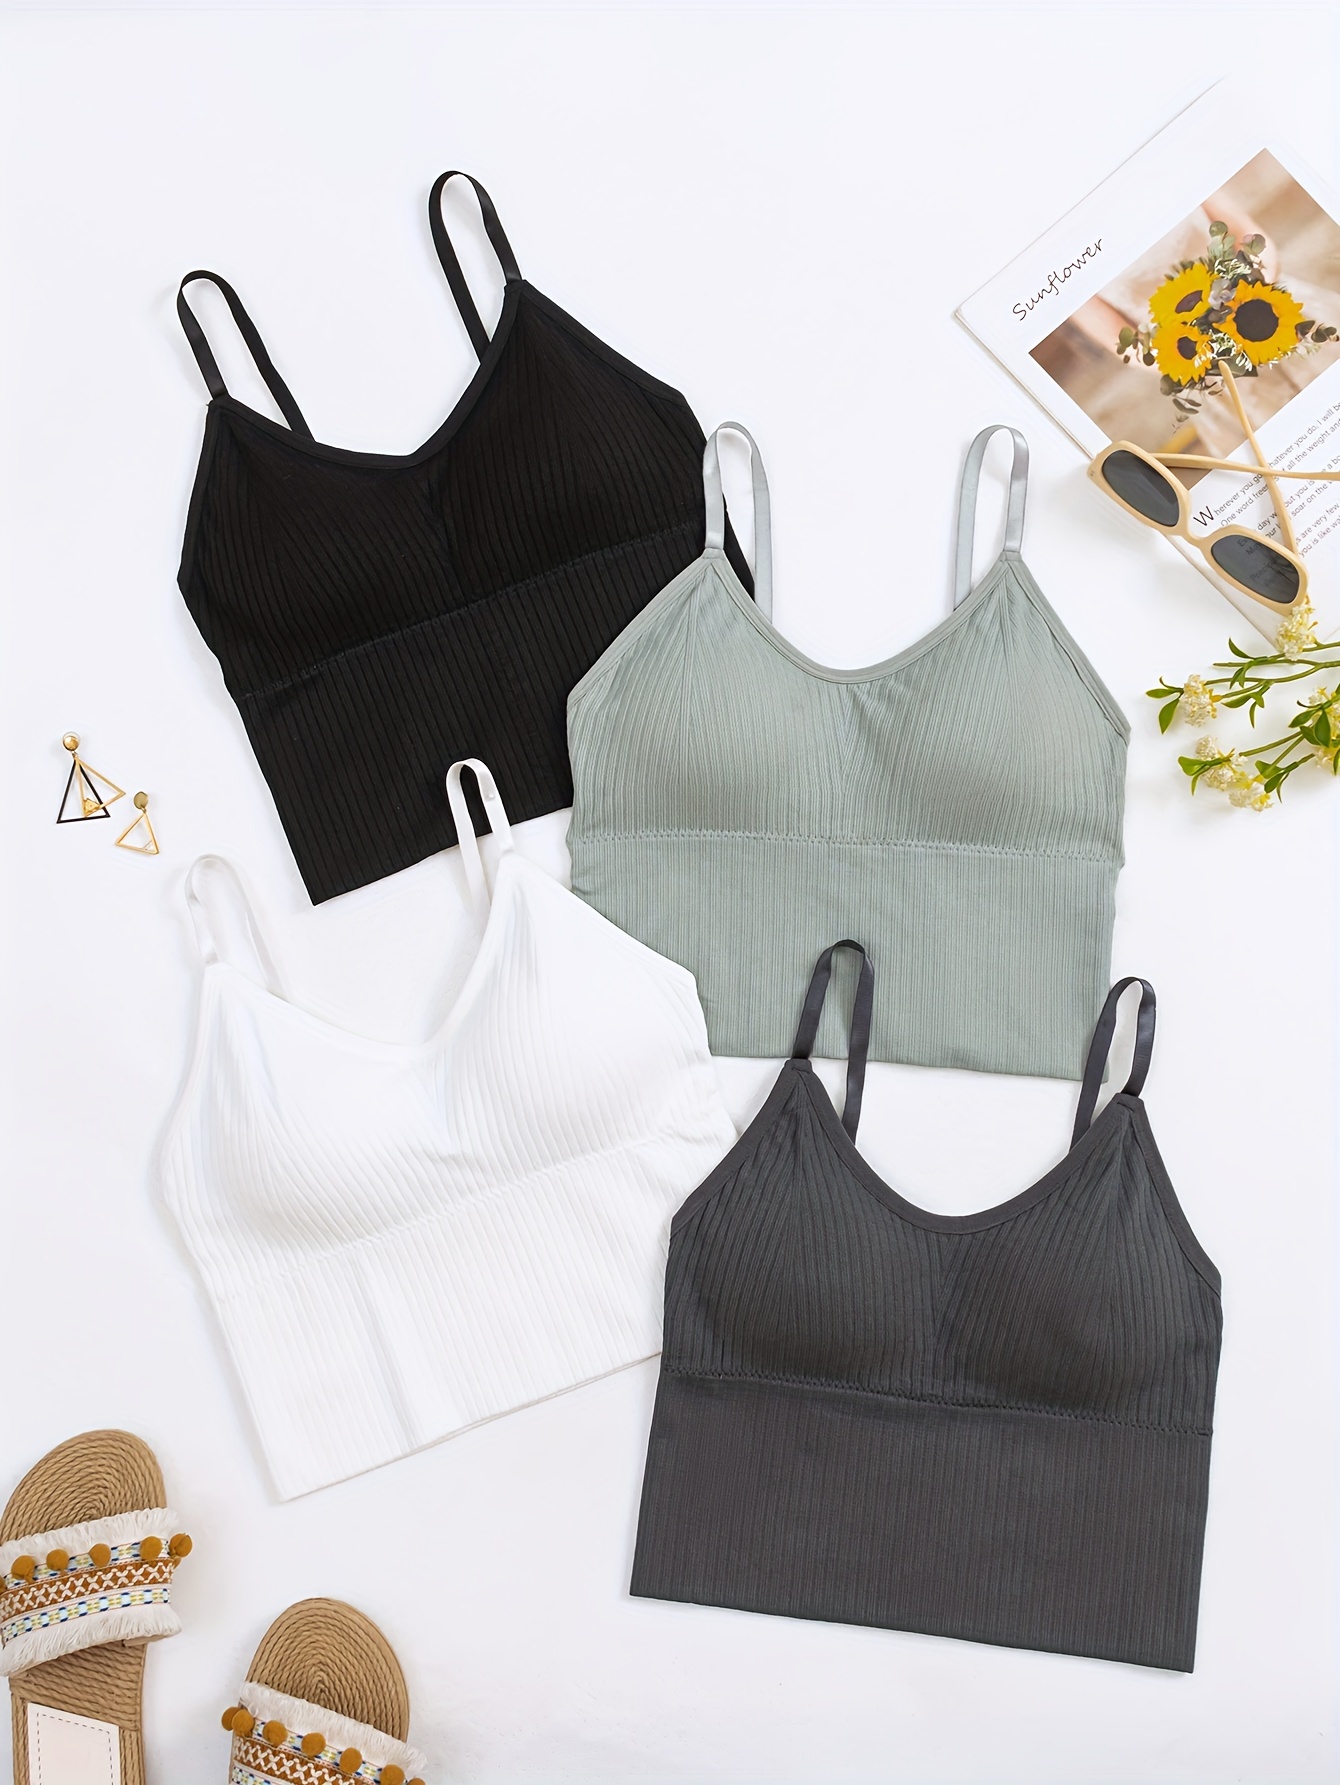 4-Pack of Comfy Spaghetti Strap Sport Bras - Perfect for Working Out!